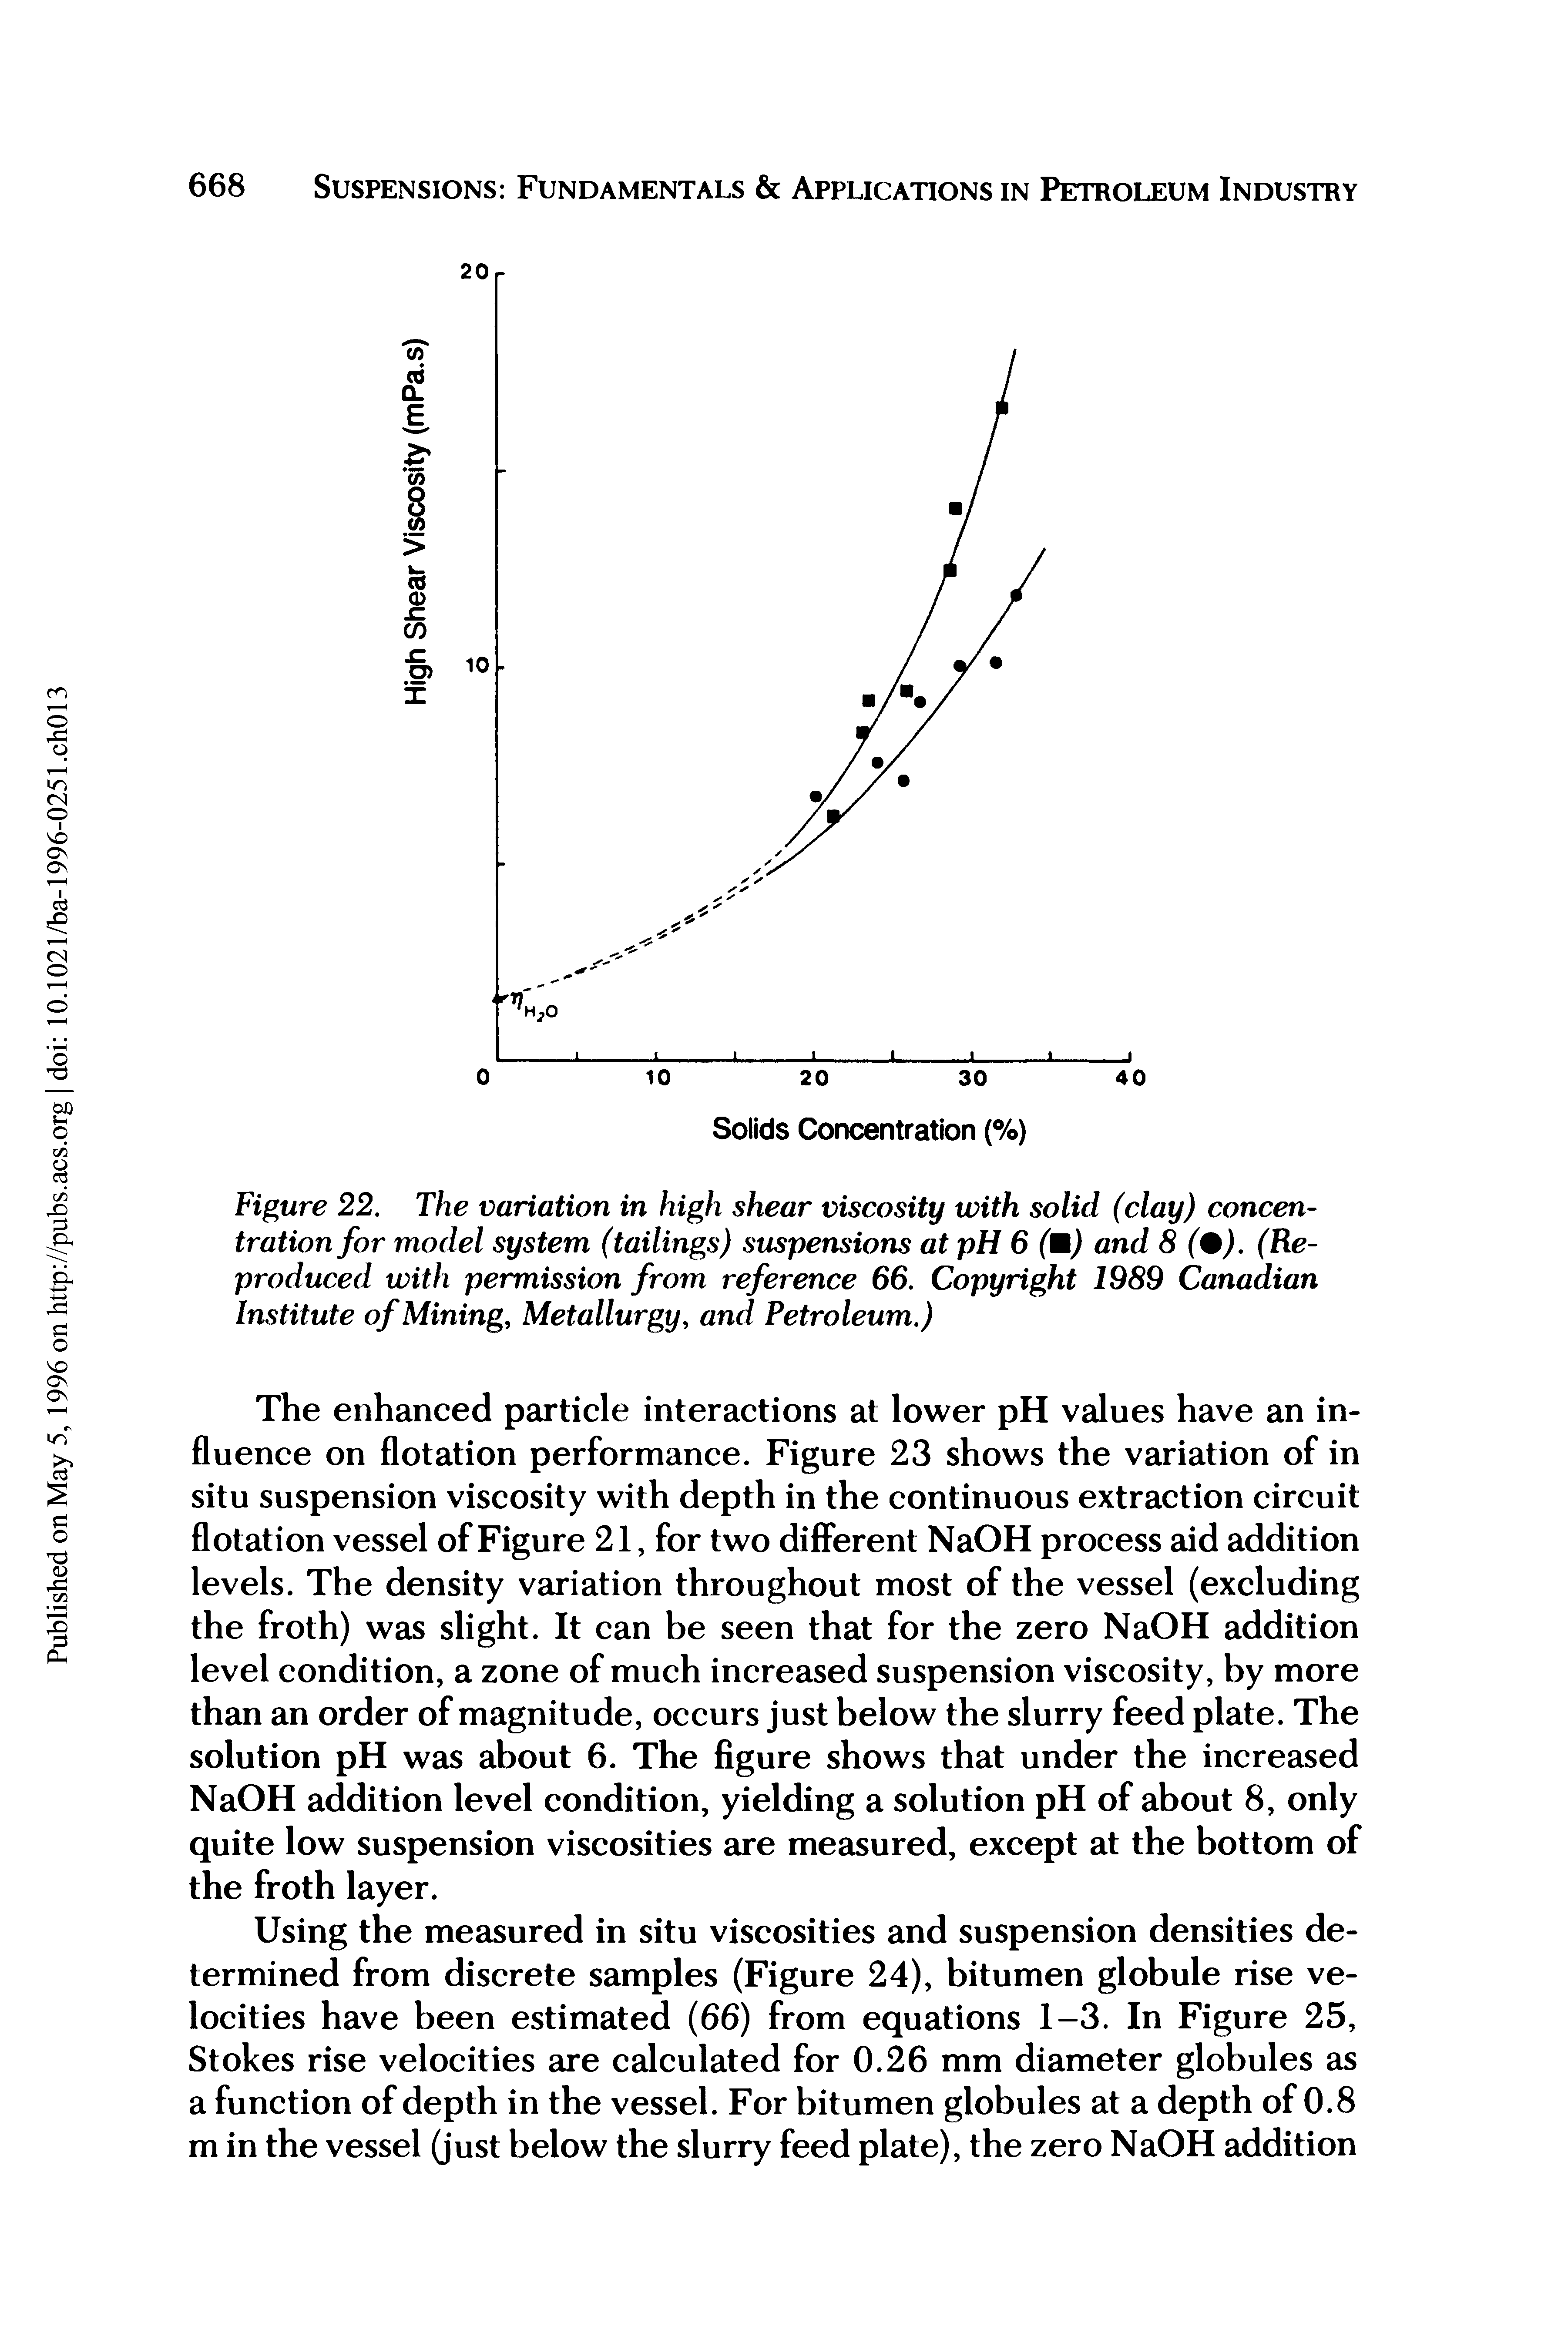 Figure 22. The variation in high shear viscosity with solid (clay) concentration for model system (tailings) suspensions at pH 6 (M) and 8 (%). (Reproduced with permission from reference 66. Copyright 1989 Canadian Institute of Mining, Metallurgy, and Petroleum.)...